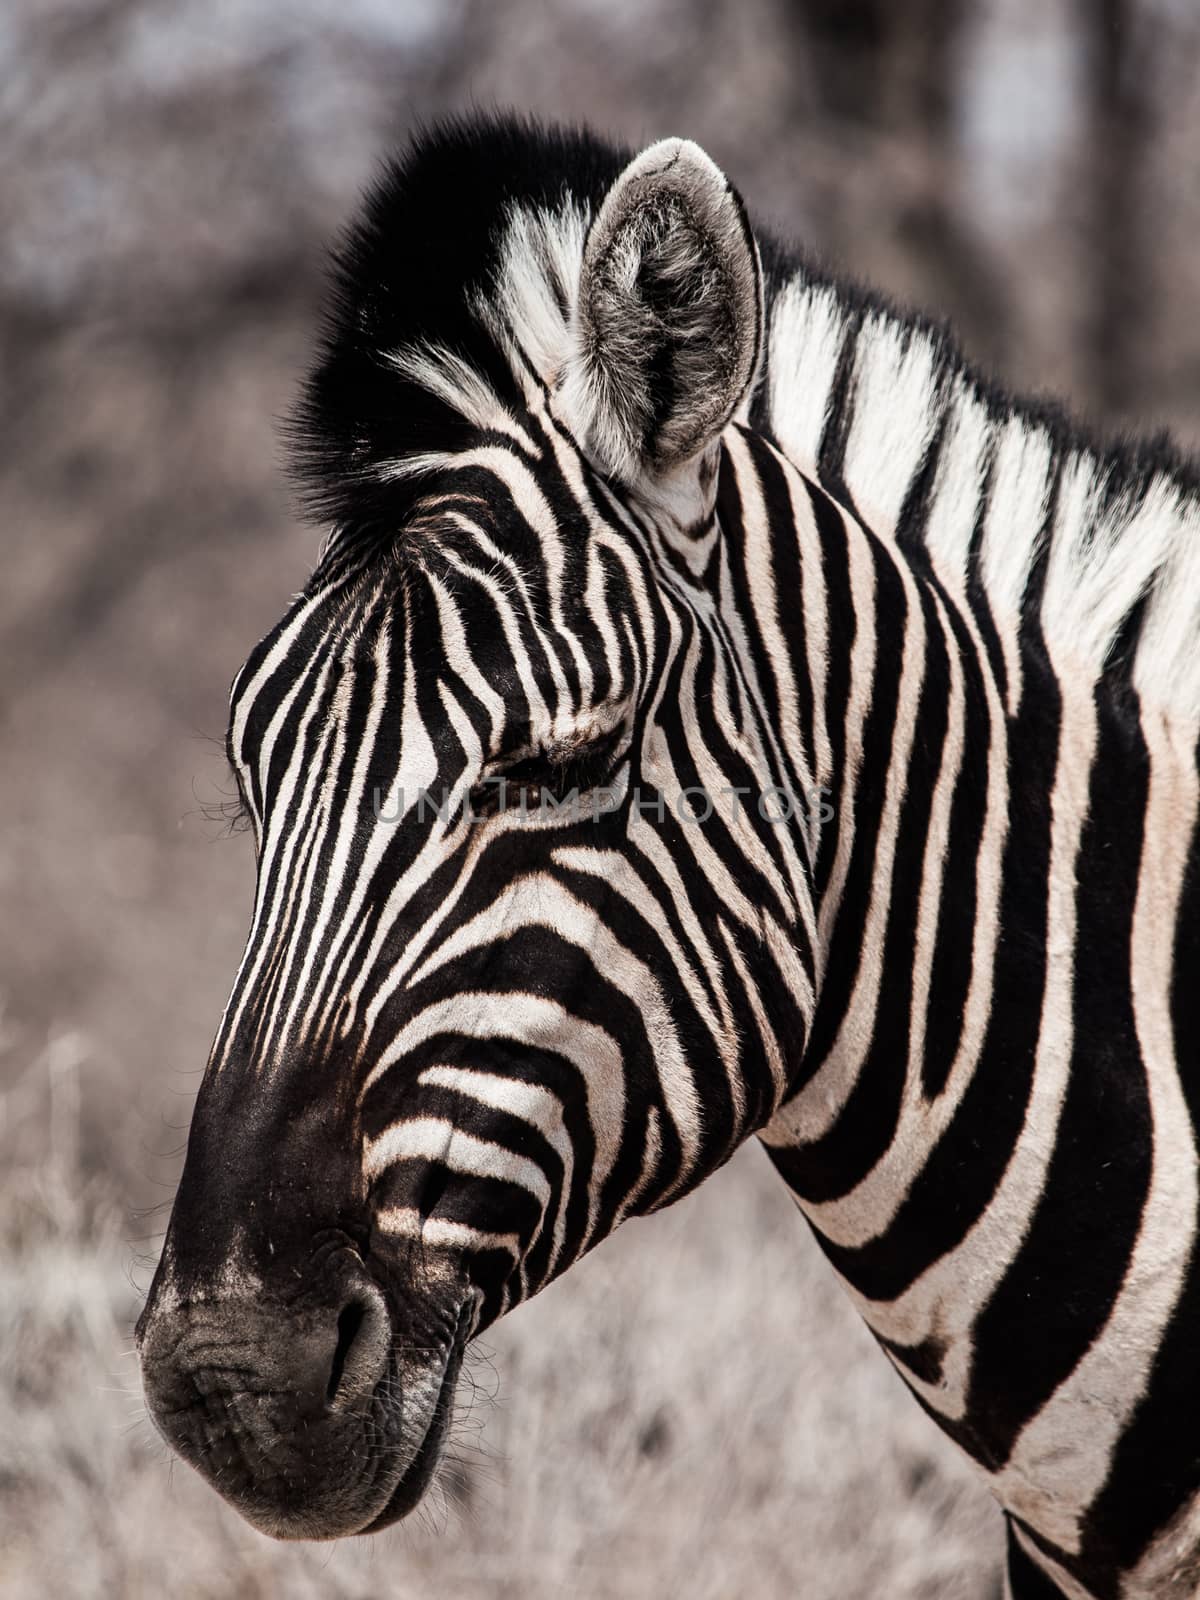 Zebra portrait in black and white by pyty